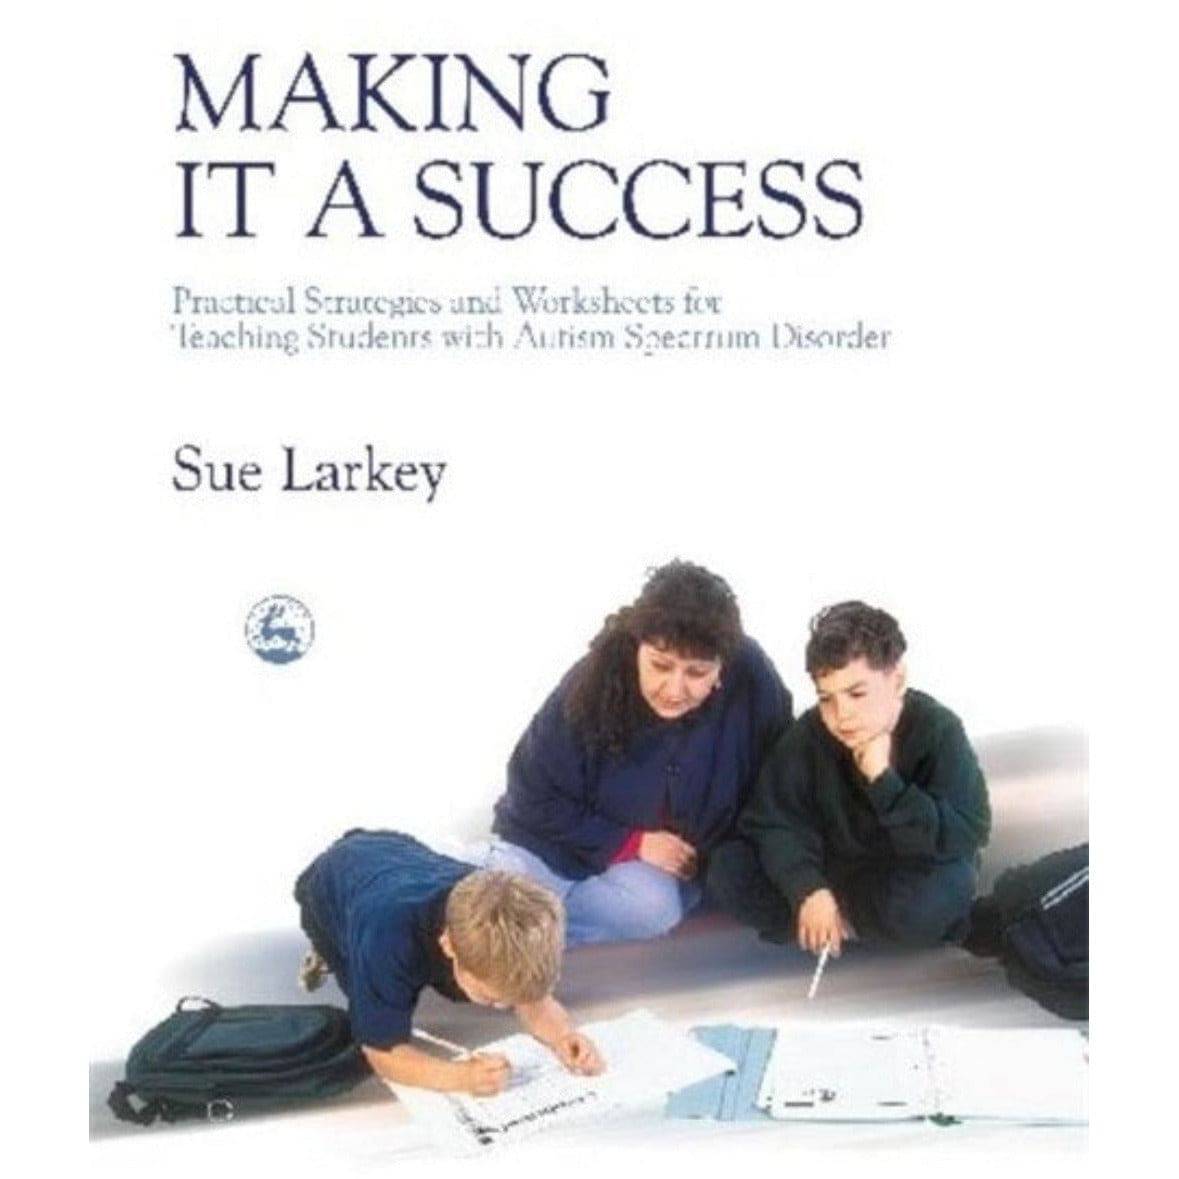 Making It a Success: Practical Strategies and Worksheets for Teaching Students with Autism Spectrum Disorder - Sensory Circle